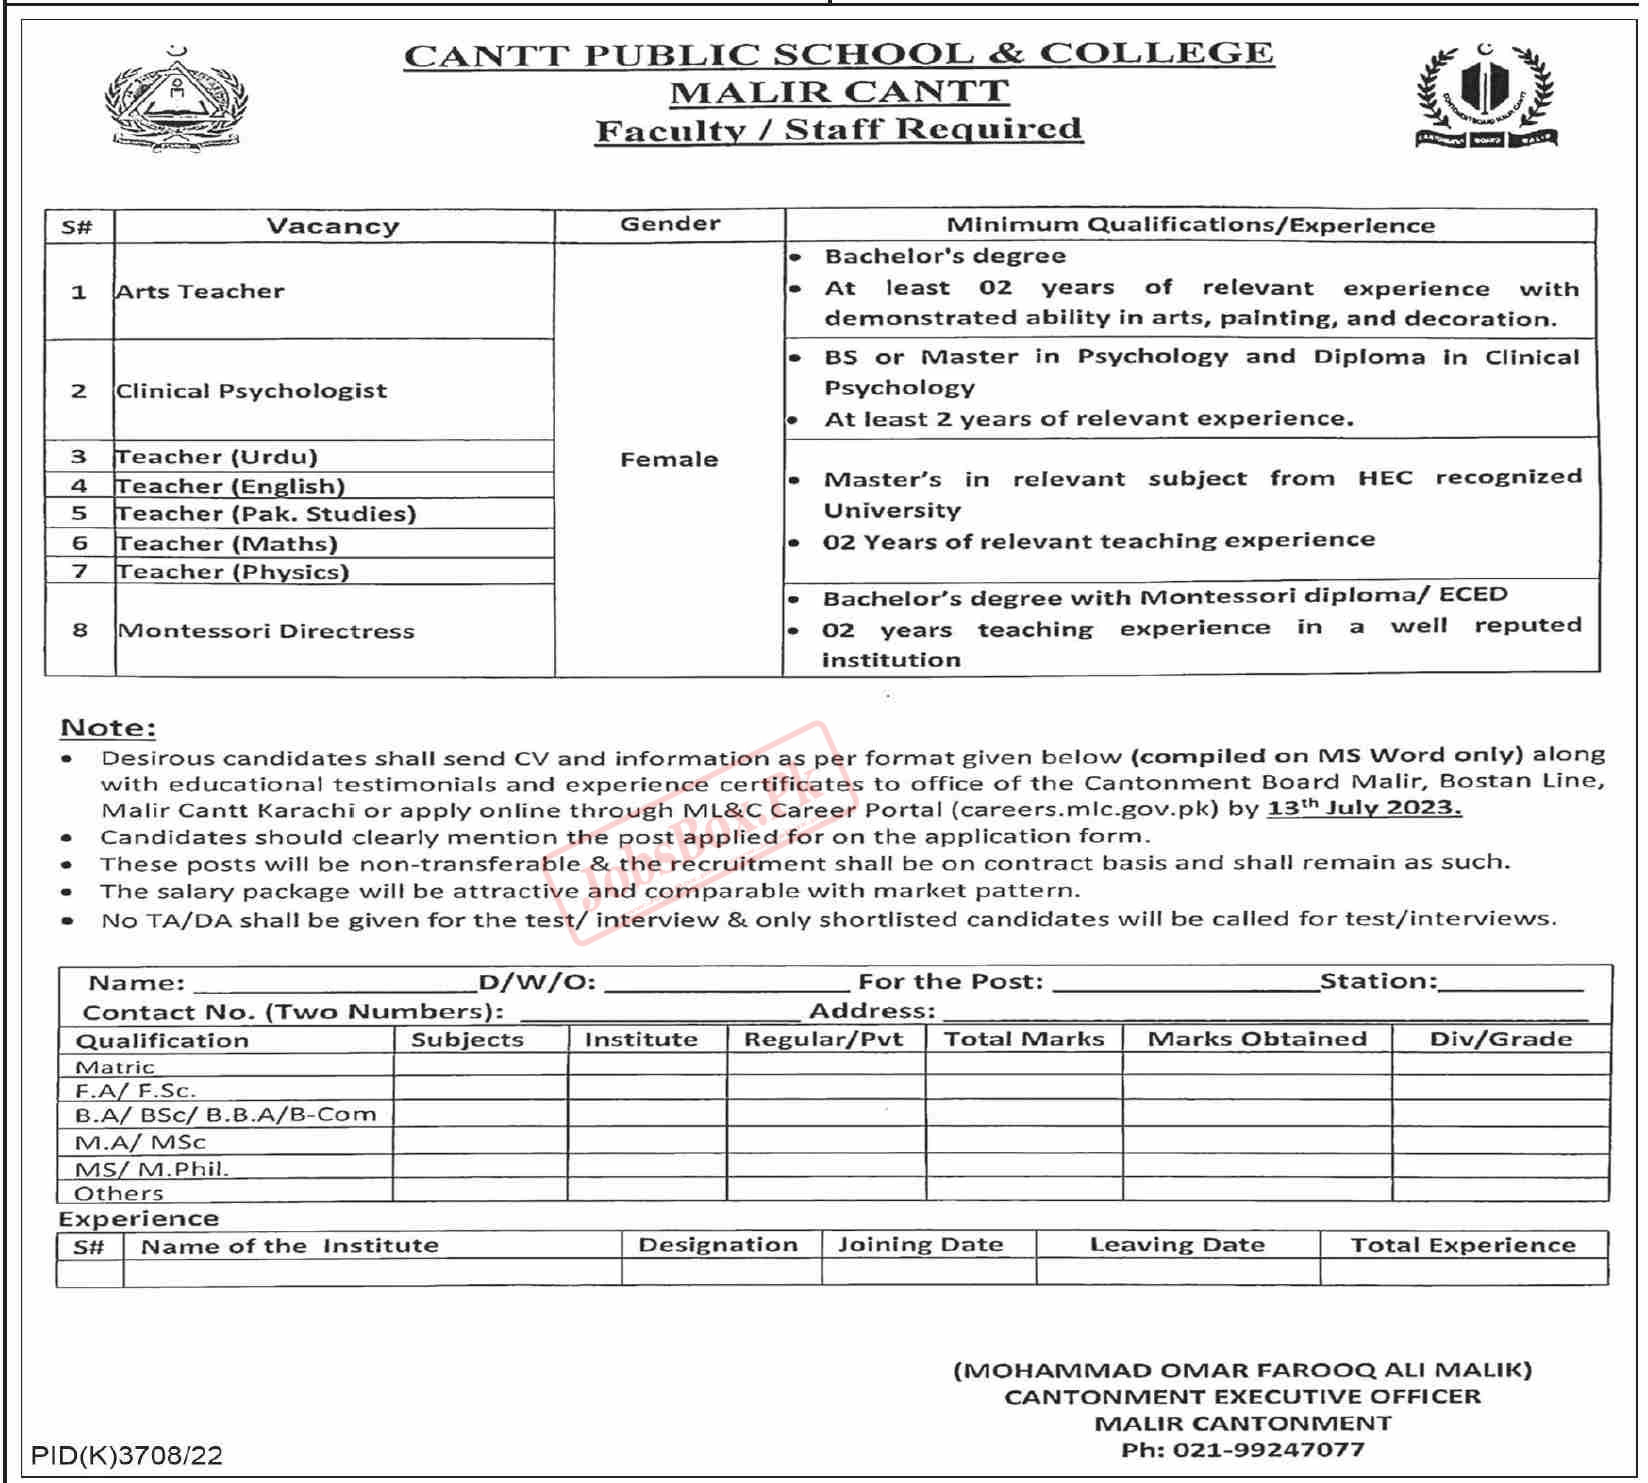 Cantt Public School and College Malir Cantt Jobs 2023